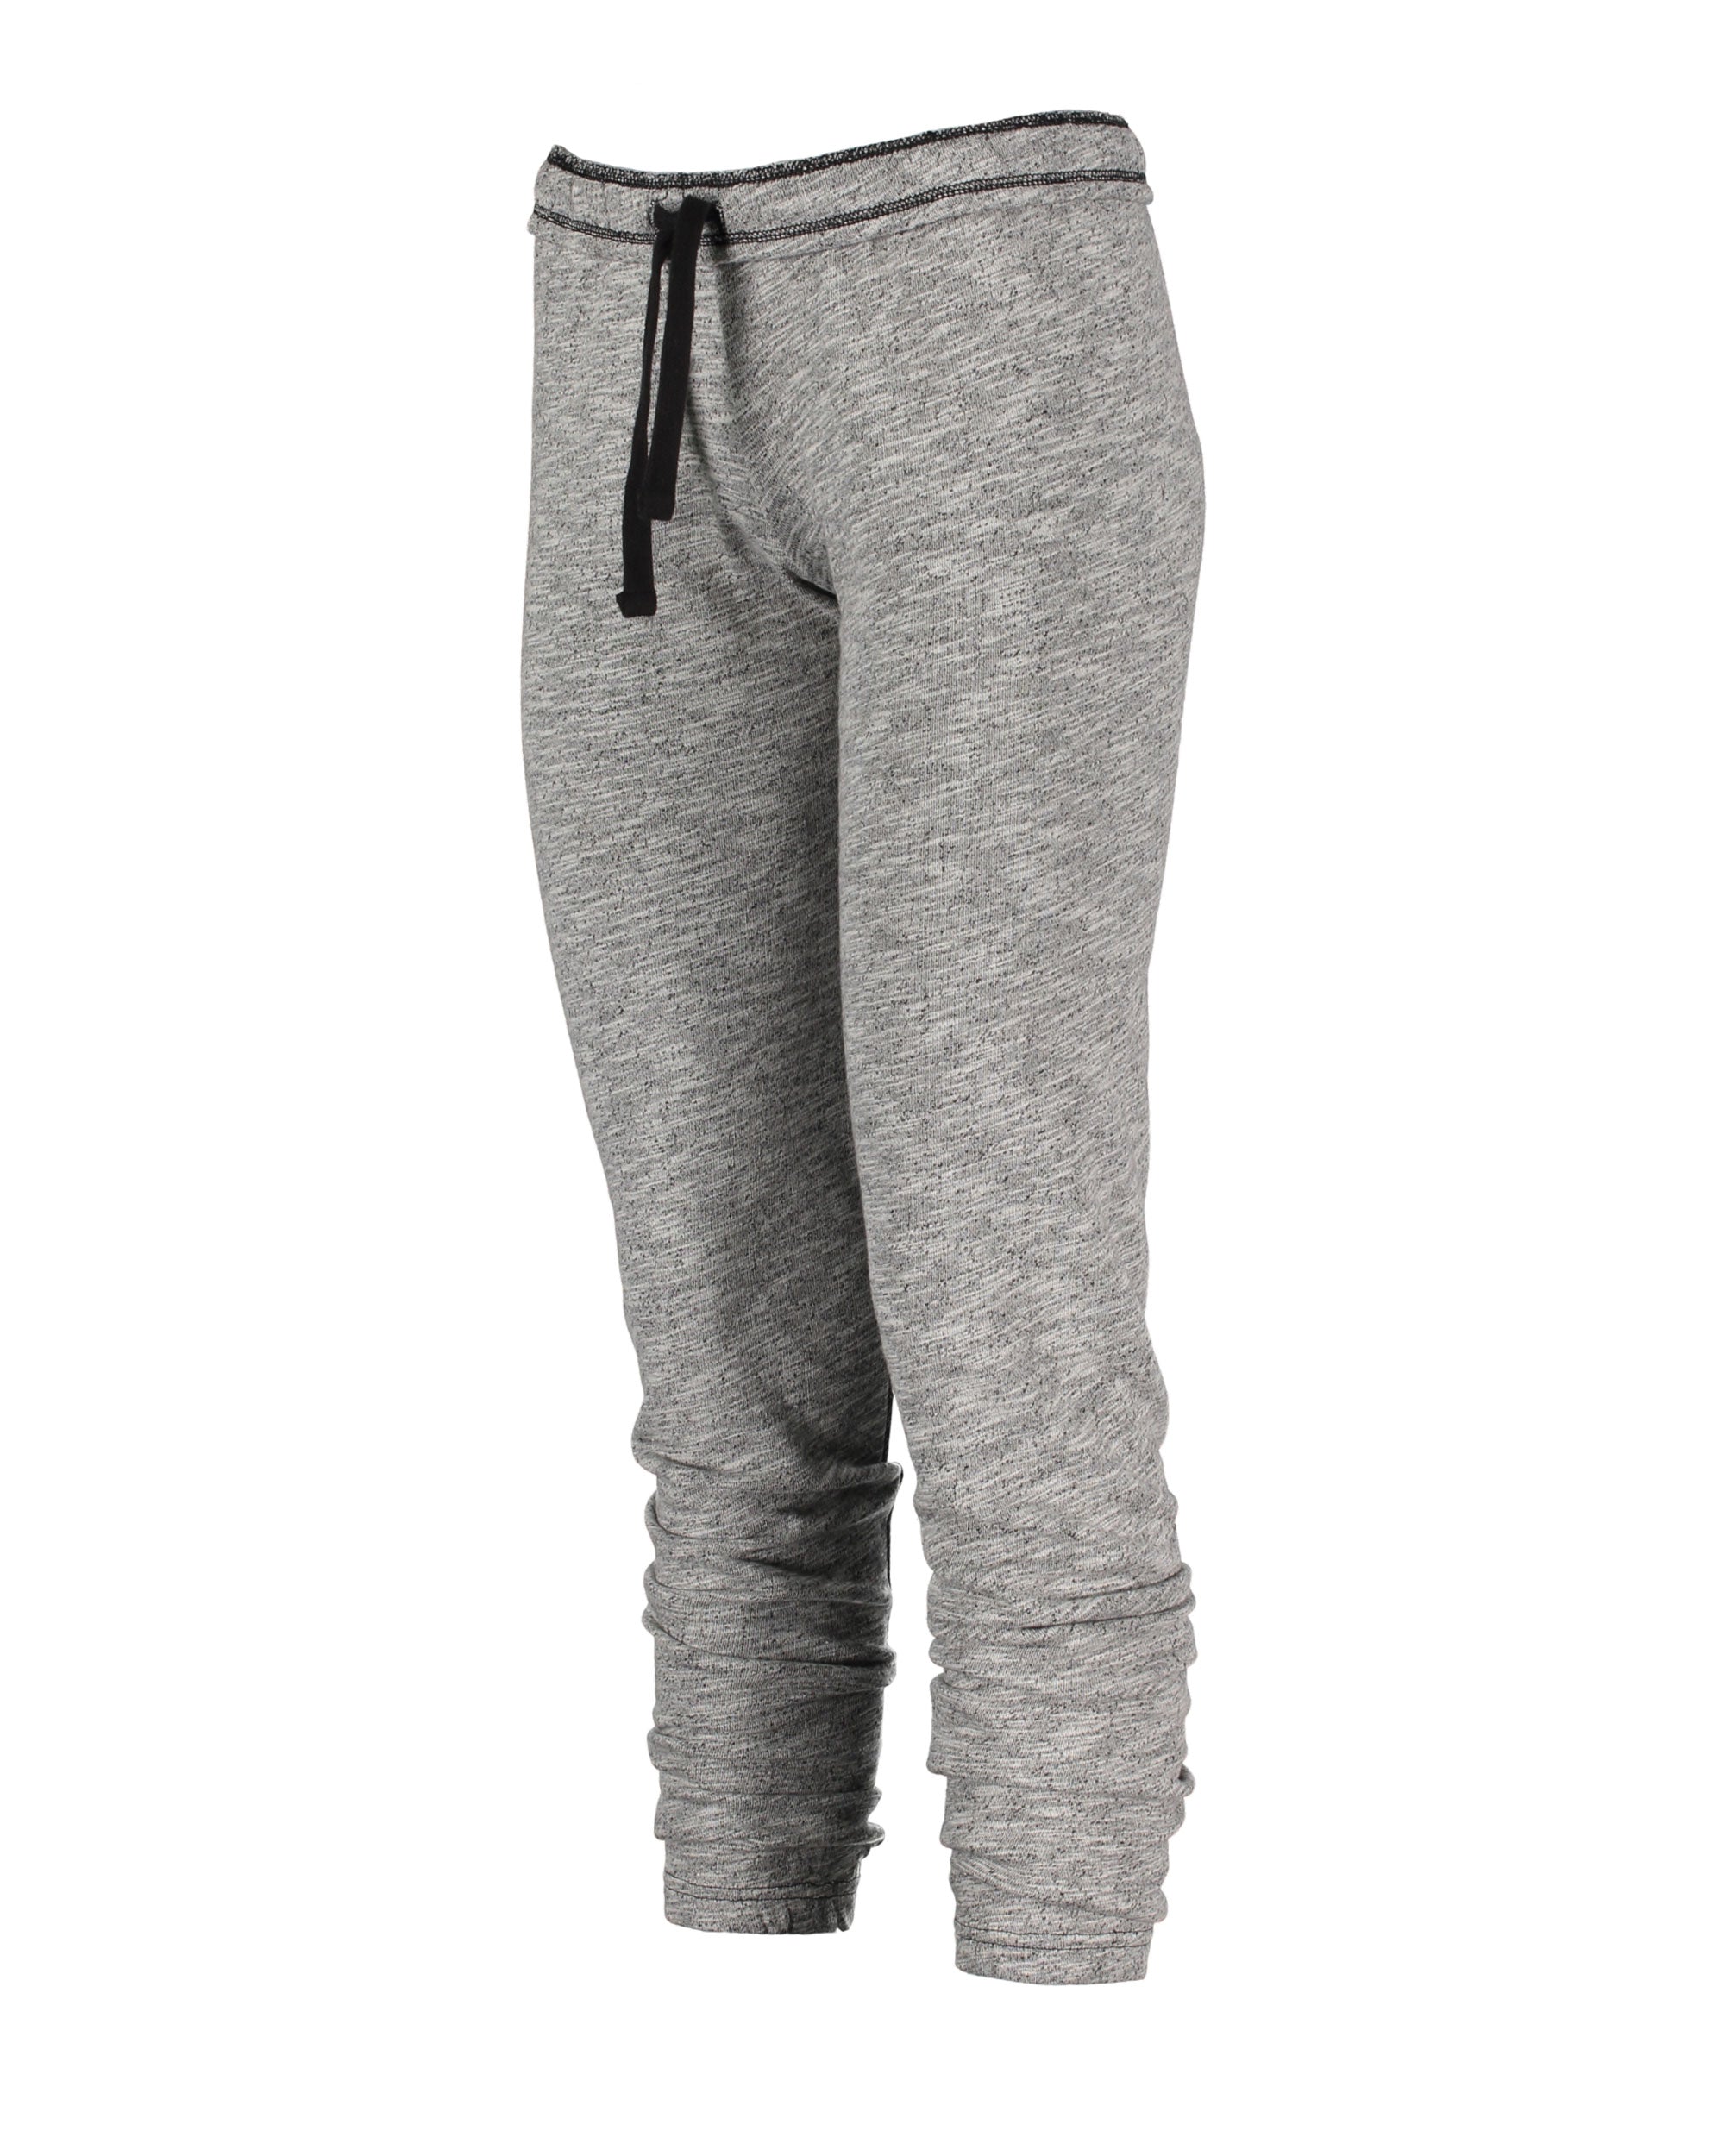 The Marled French Terry Jogger